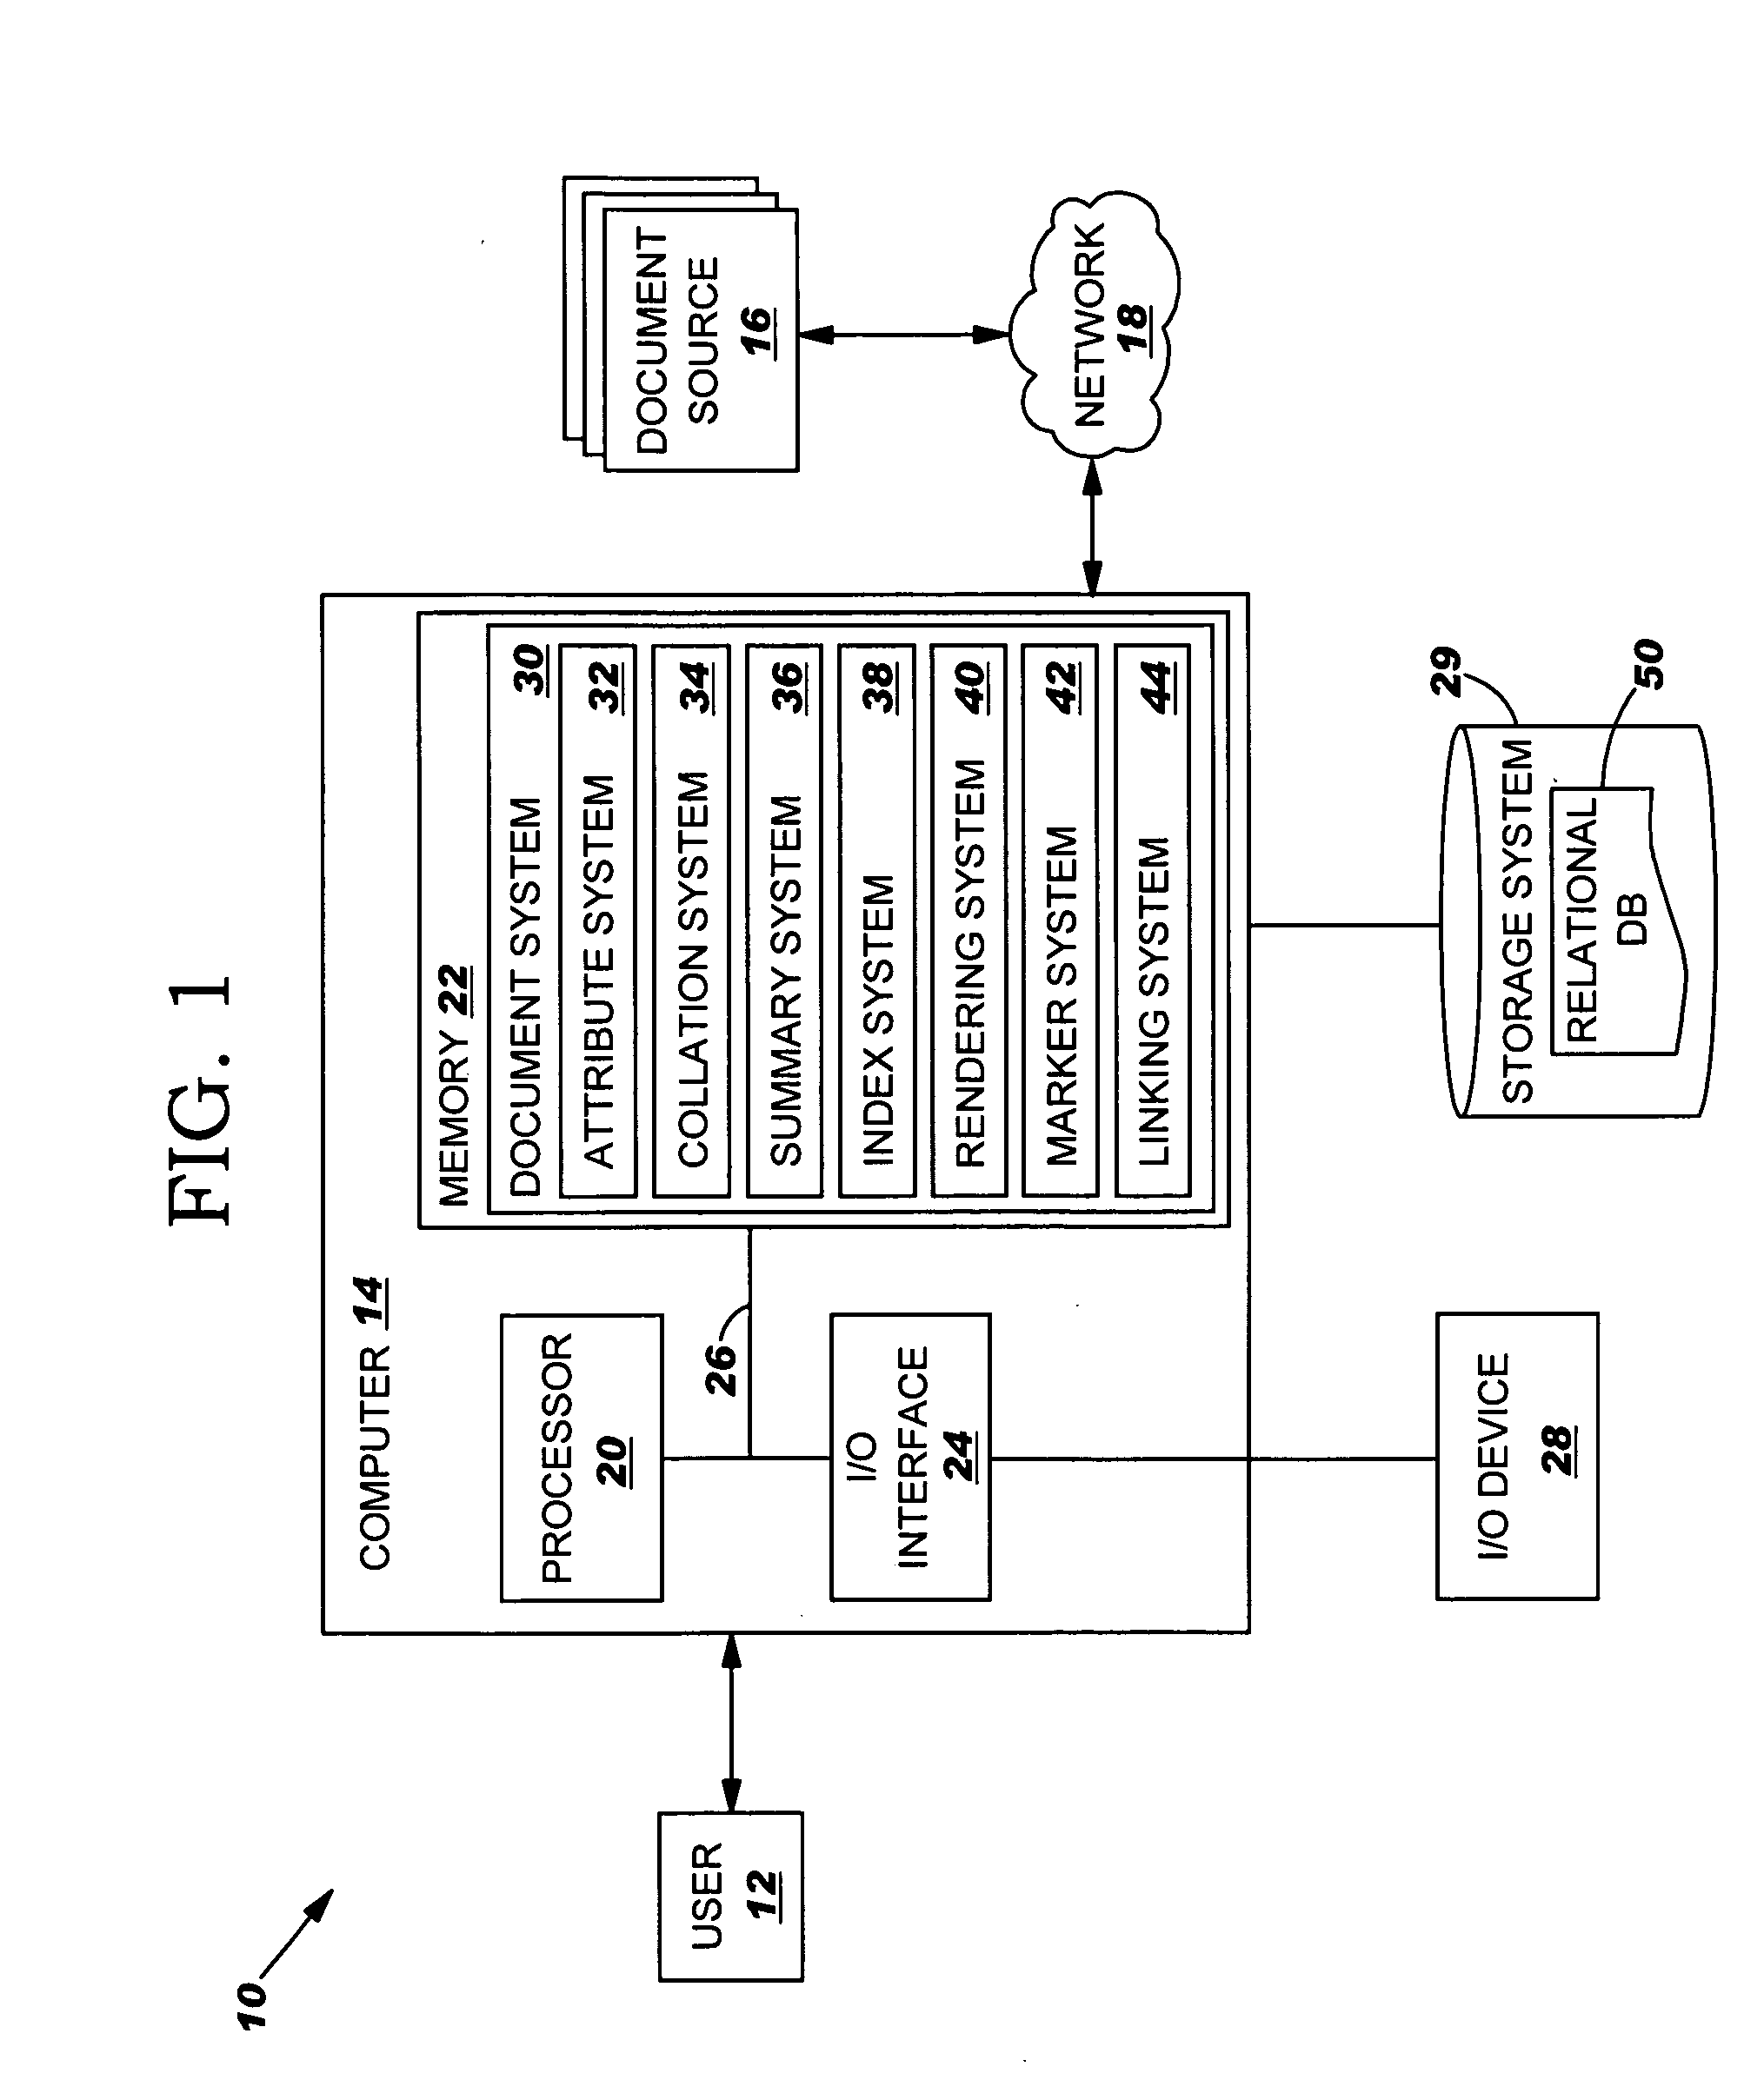 Method, system and program product for managing document summary information